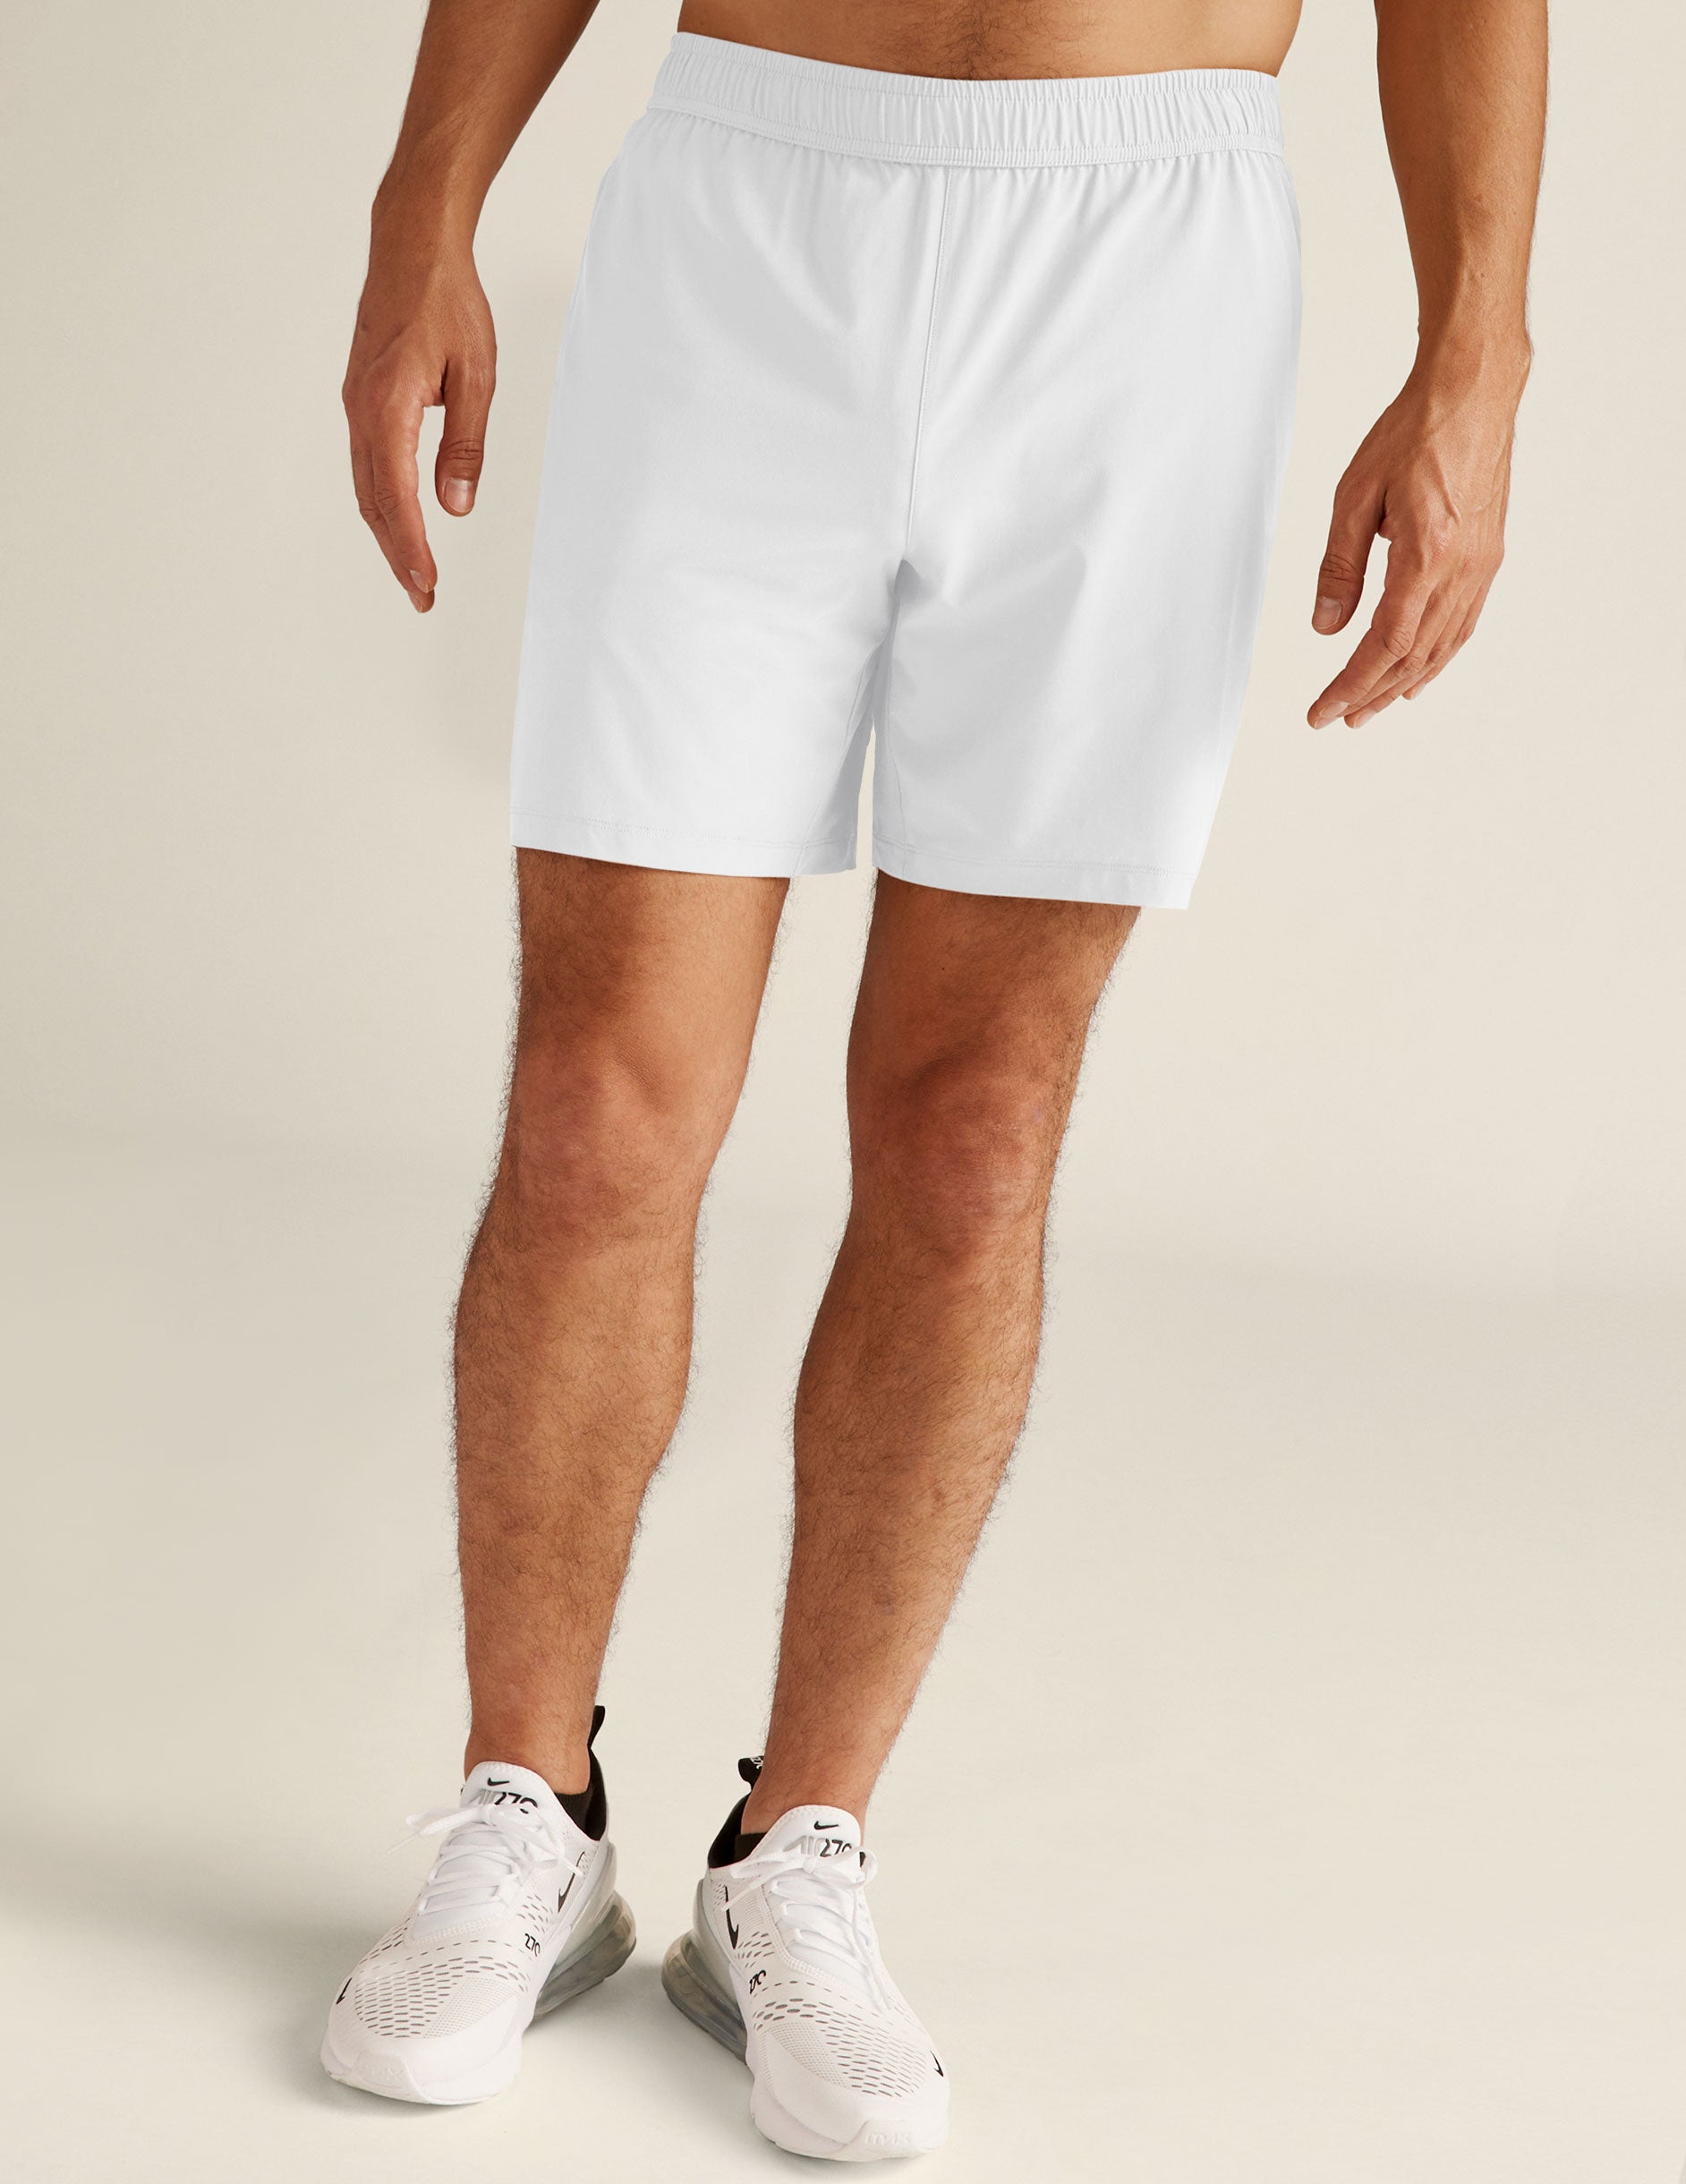 white mens lined shorts.